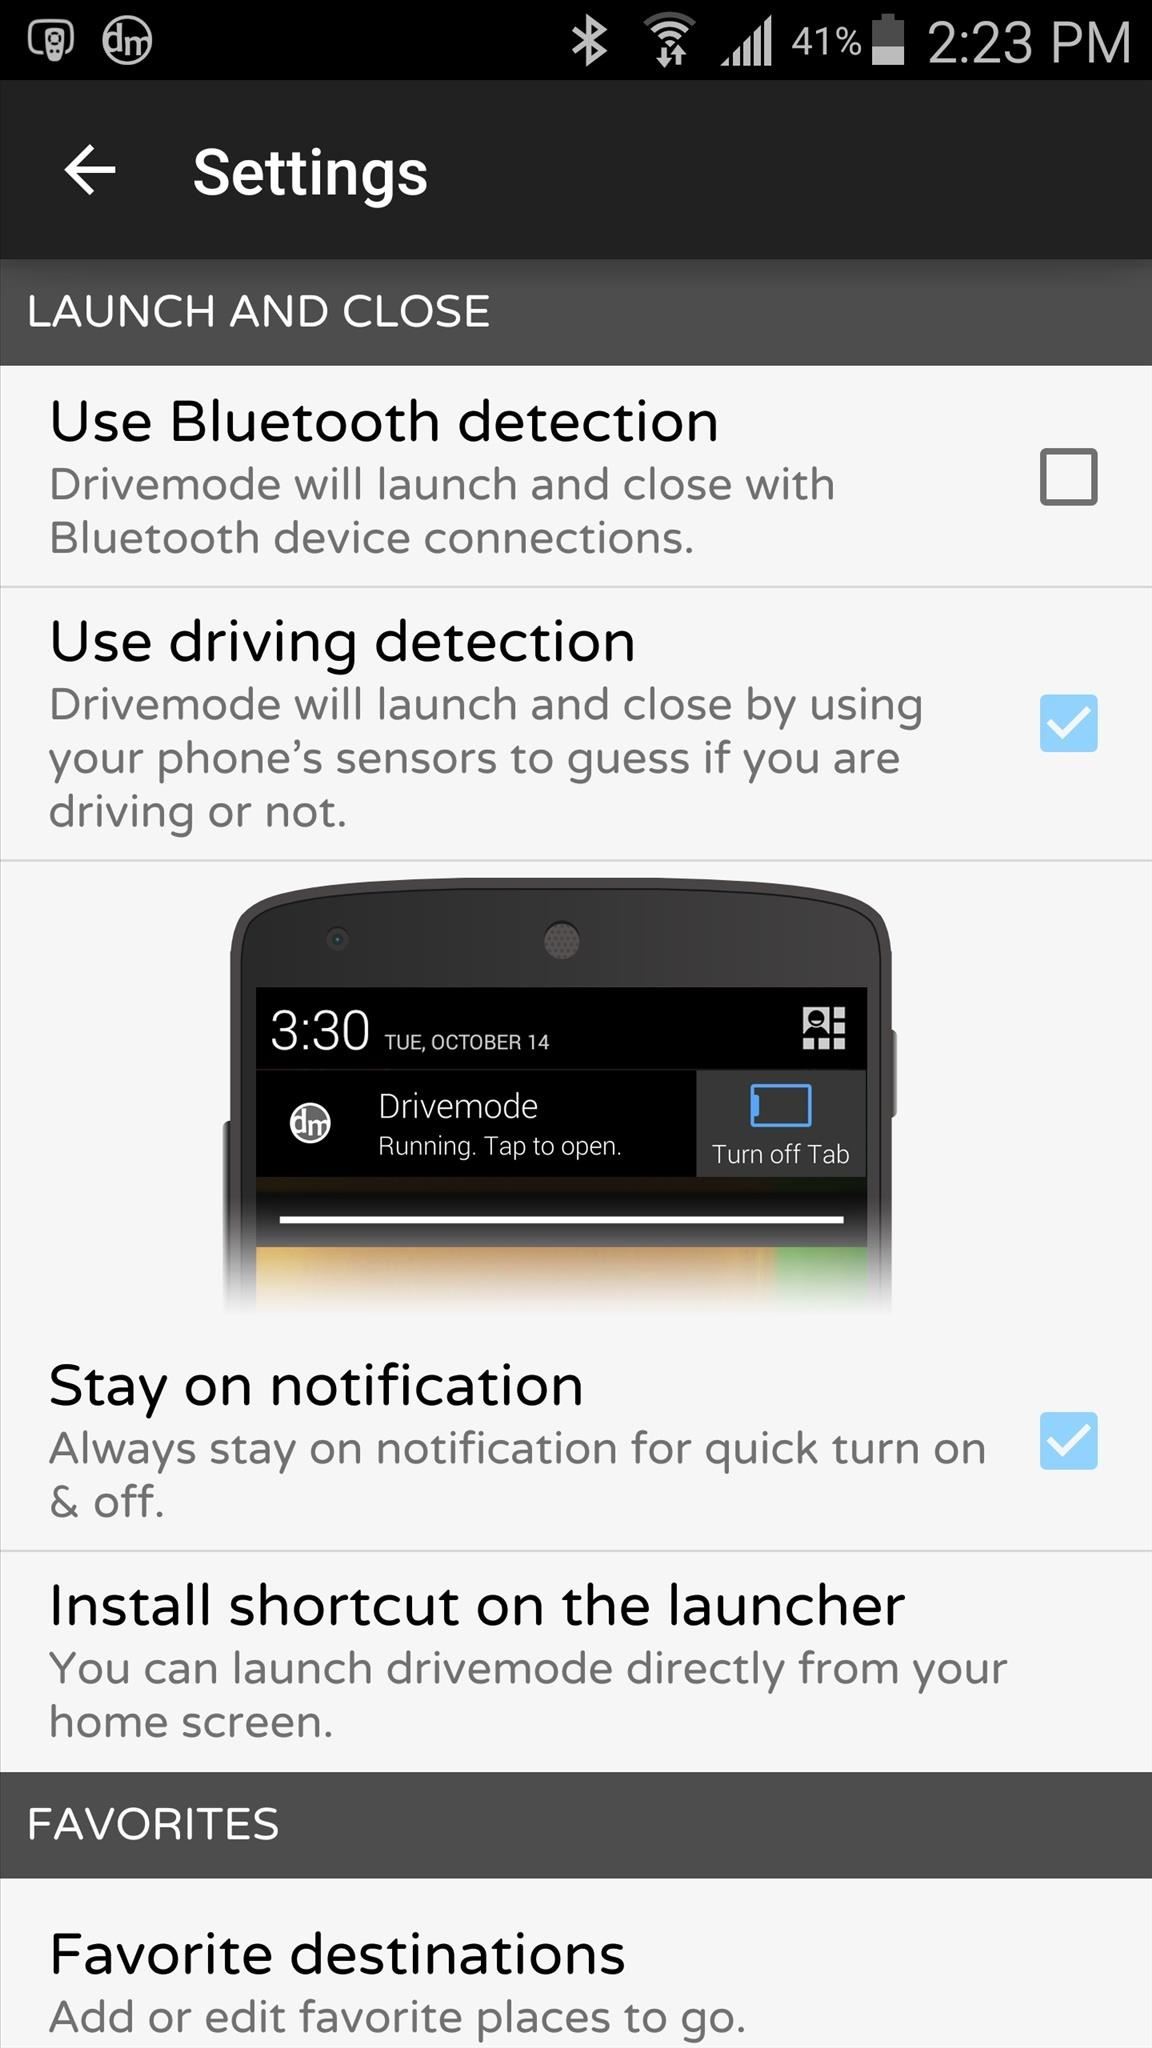 Simplify Your Android's UI for Less Distracted Driving